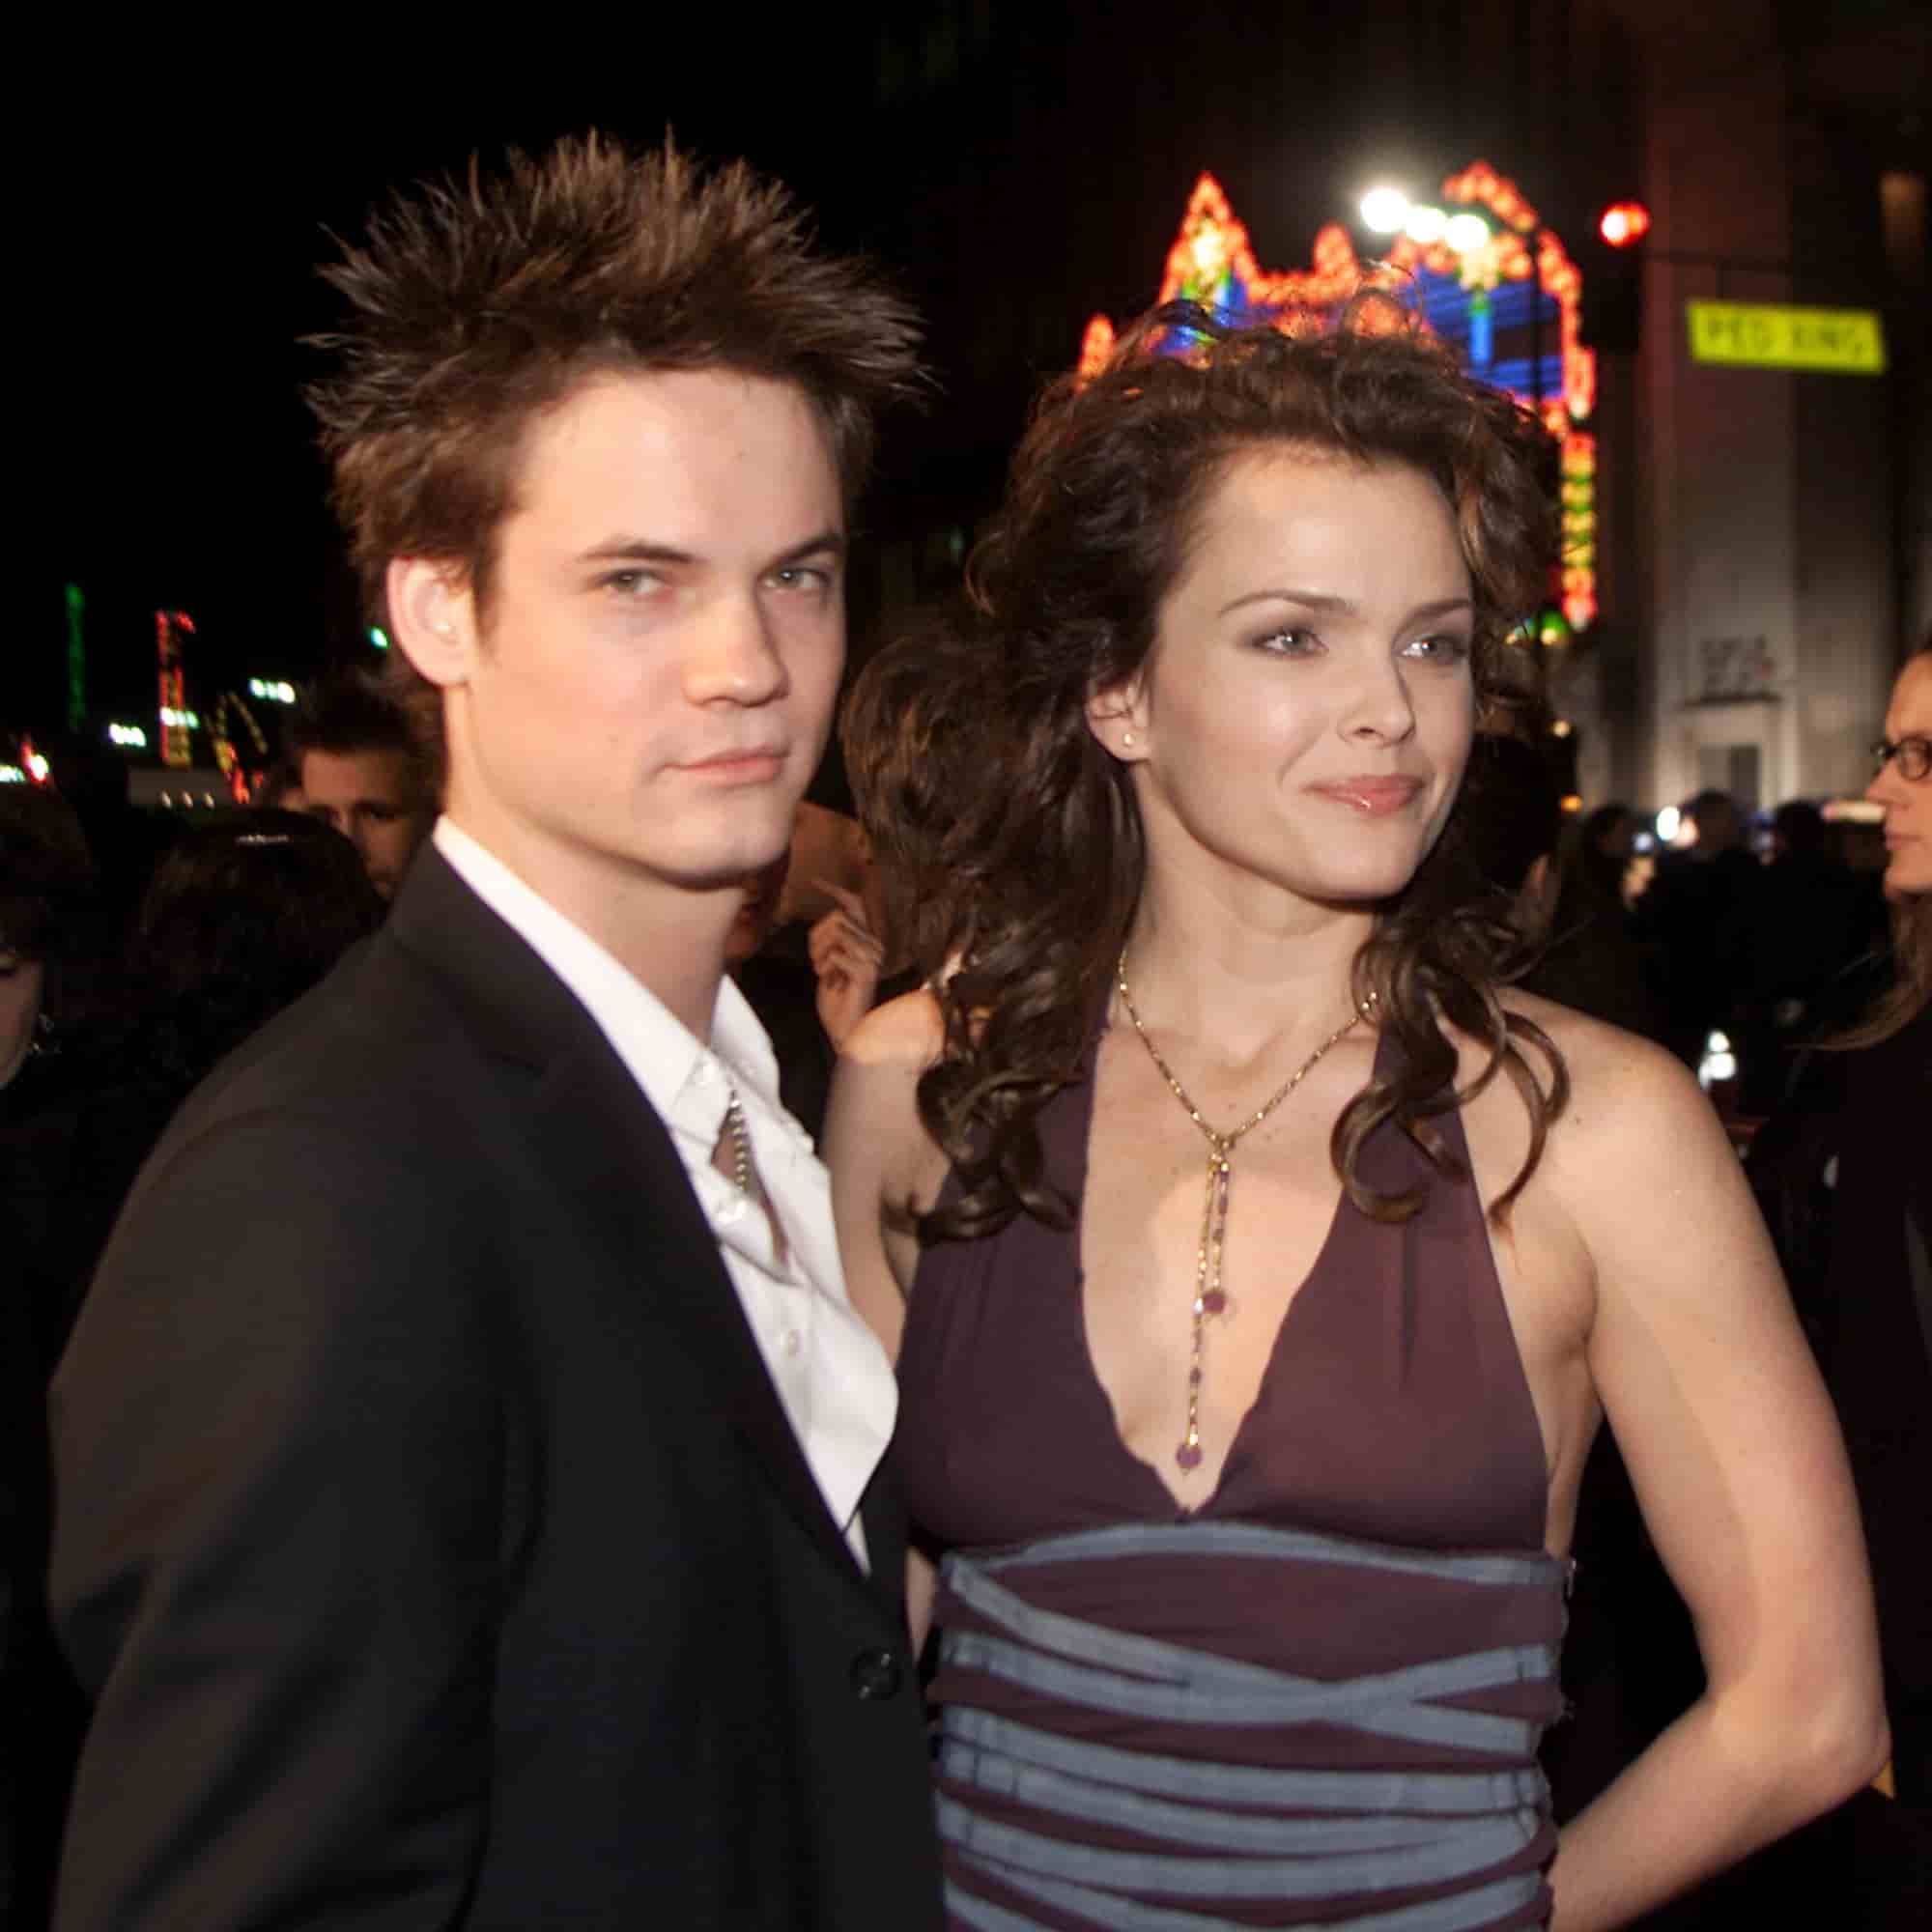 Image of Shane West with his former partner and colleague, Dina Meyer